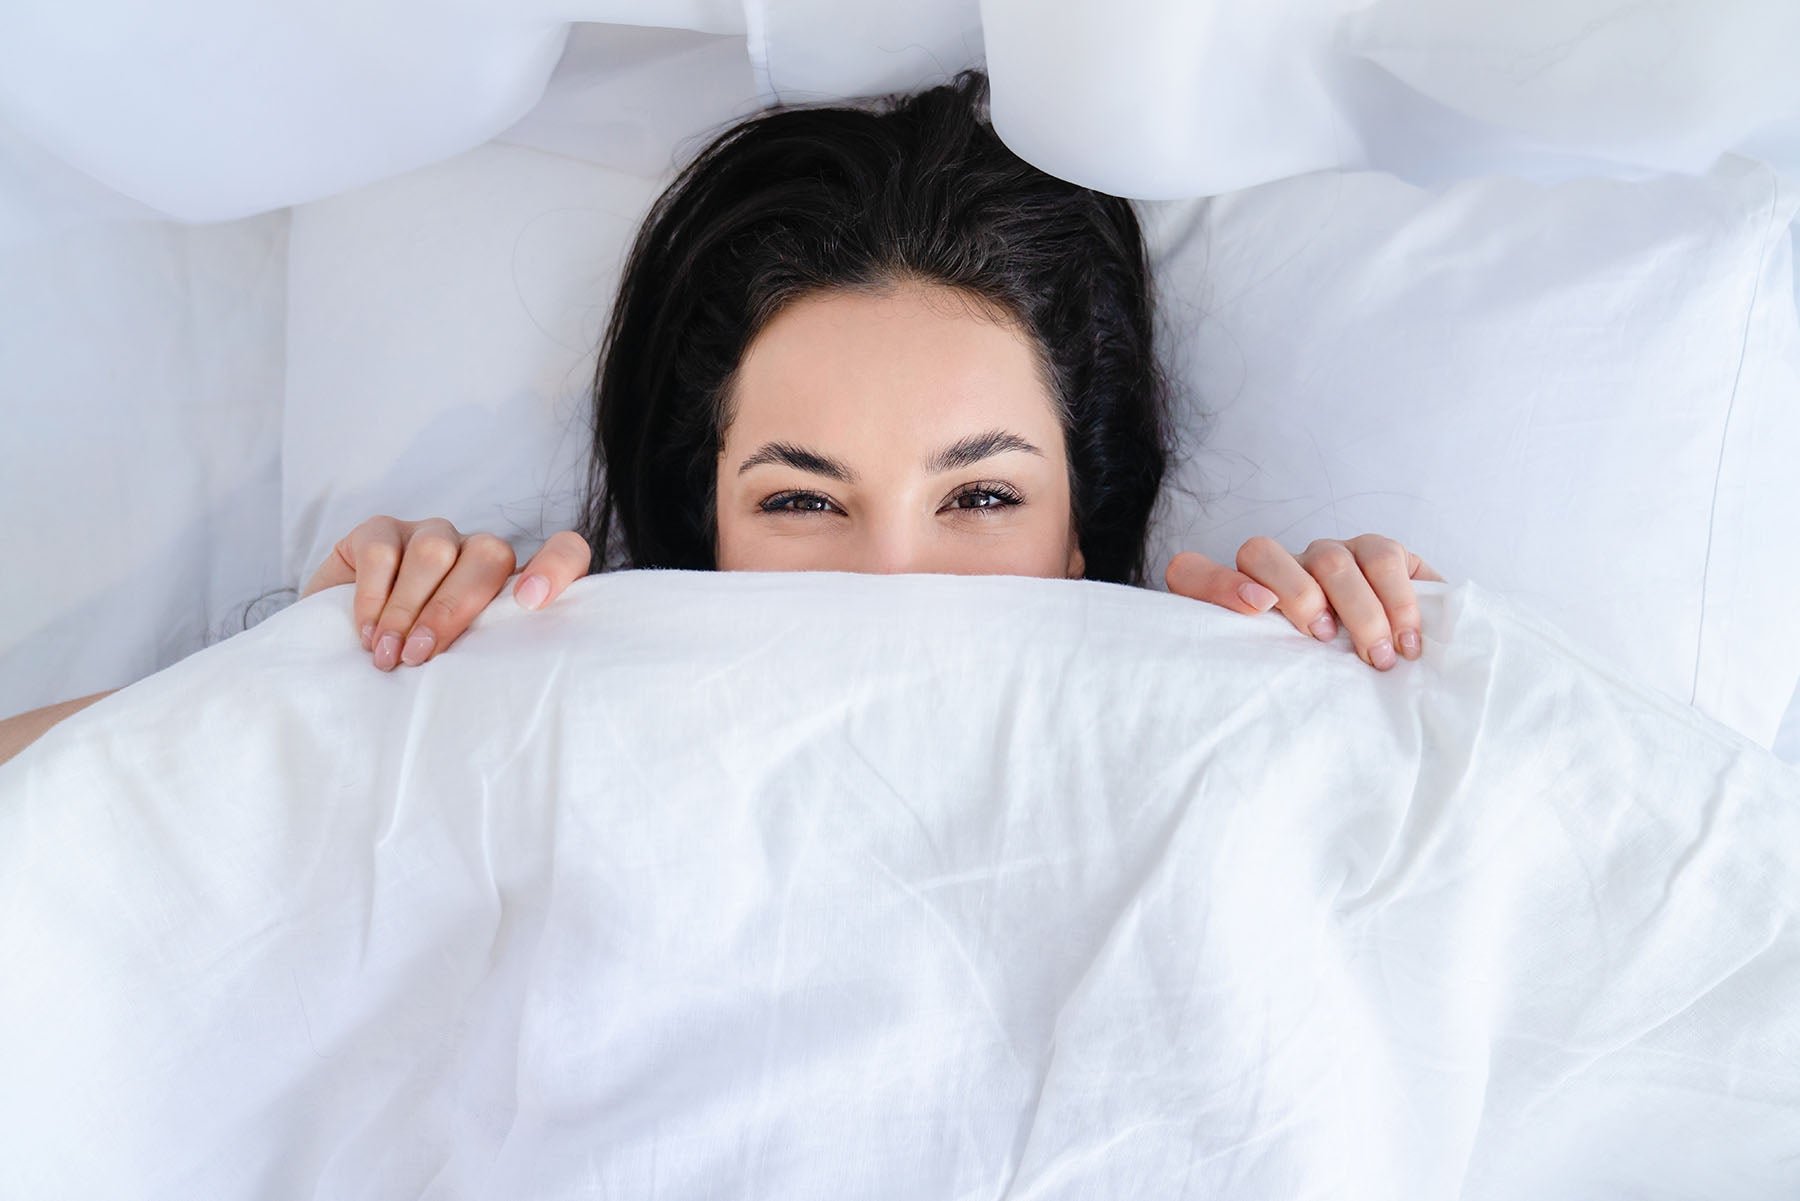 Struggling to get out of bed in the morning? 8 Tips to Help You Sleep Better